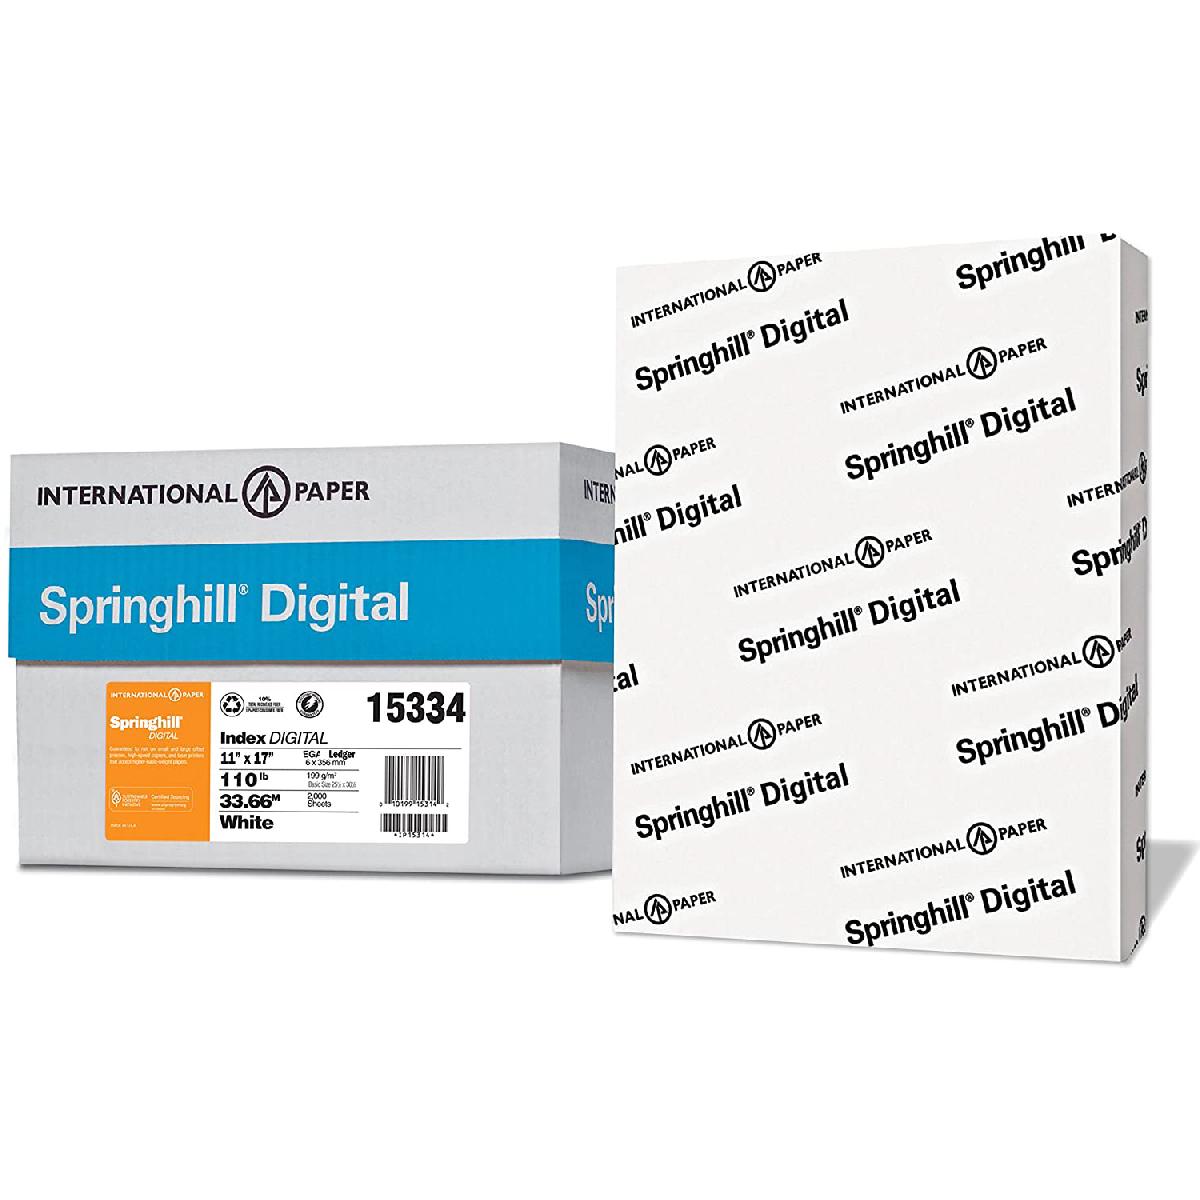 Springhill® Index Digital White 110 lb. Card Stock 11x17 in. 250 Sheets per Ream